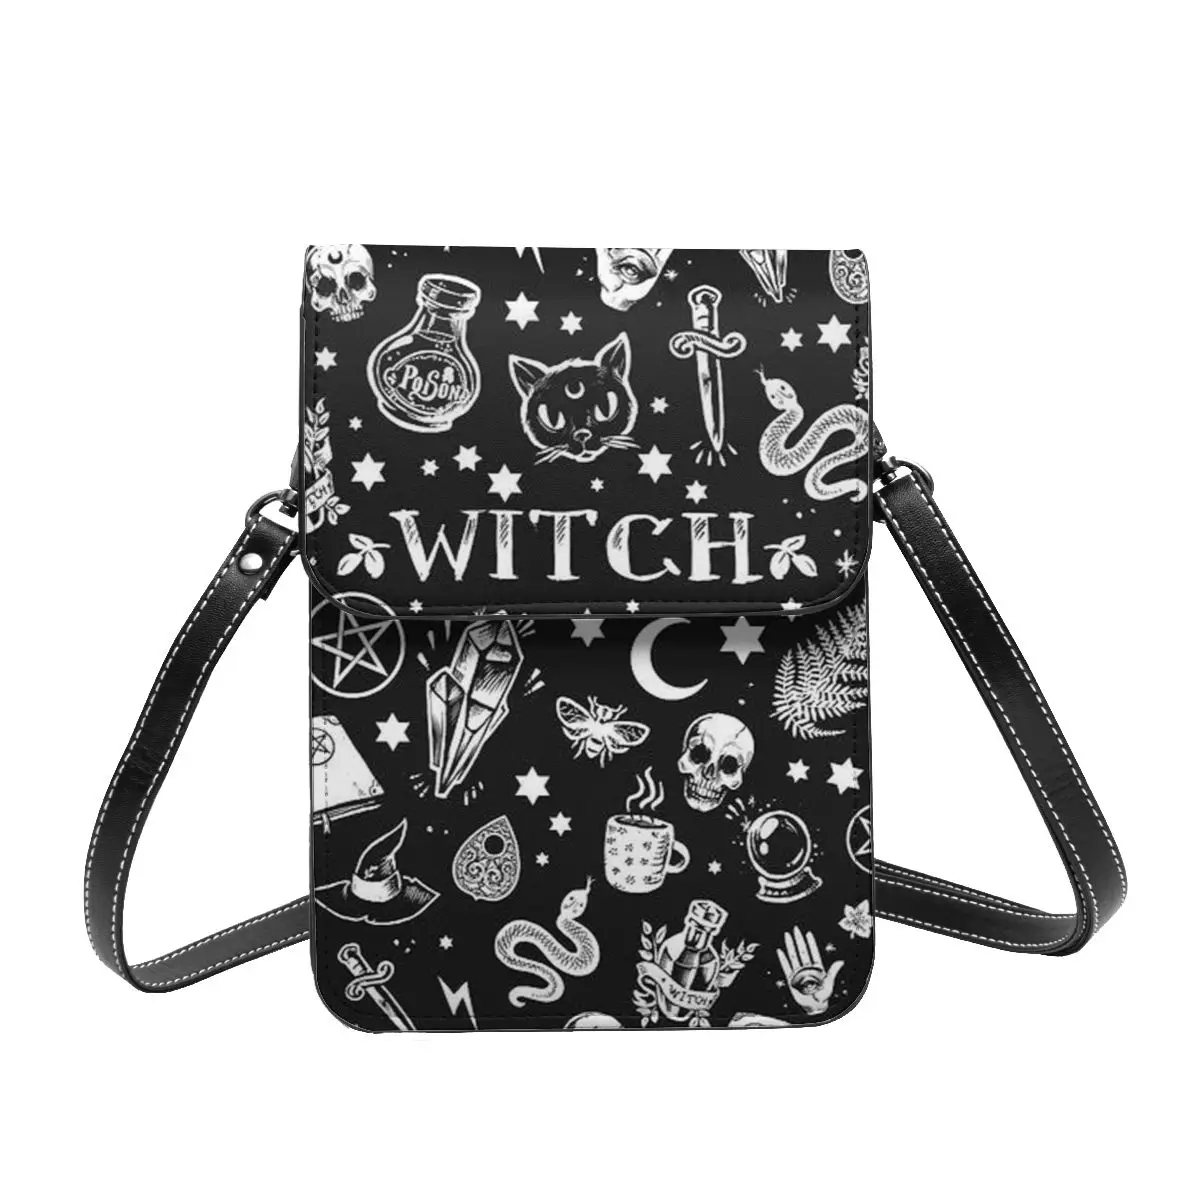 WITCH PATTERN Halloween Shoulder Bag Evil Horror Aesthetic Leather Outdoor Mobile Phone Bag Student Fashion Bags